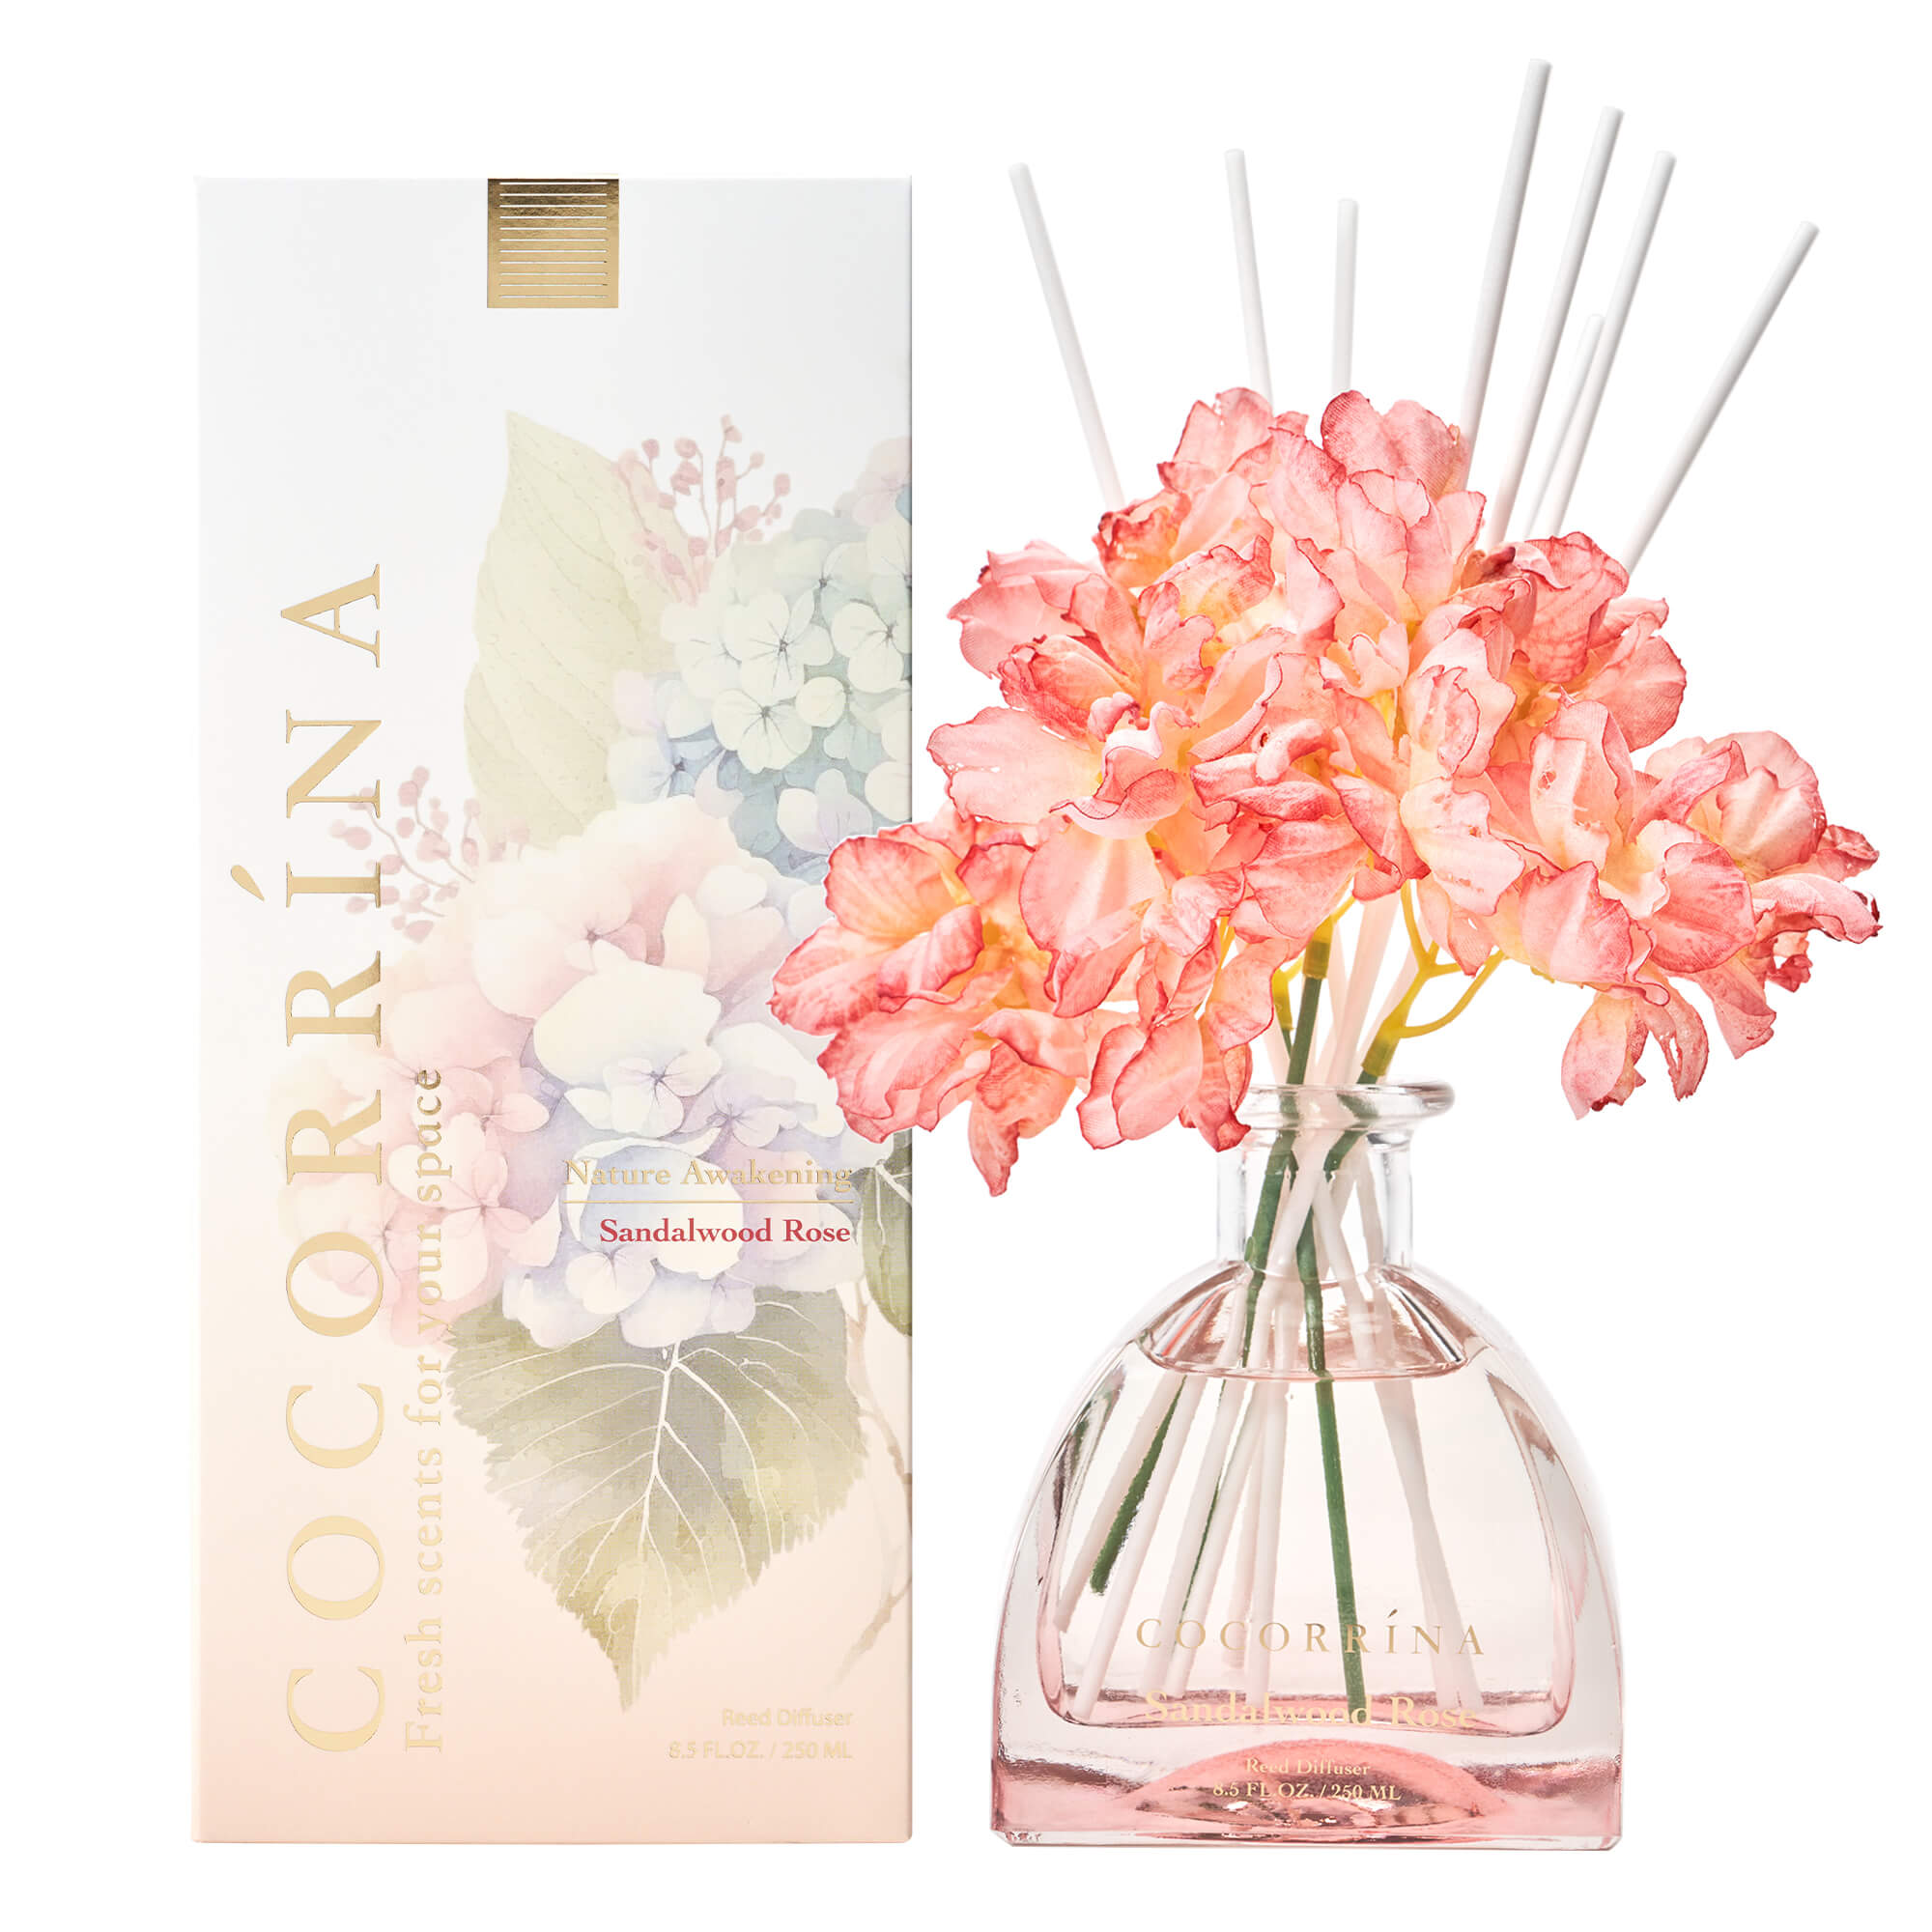 COCORRÍNA Sandalwood Rose Simple Luxe Reed Diffuser